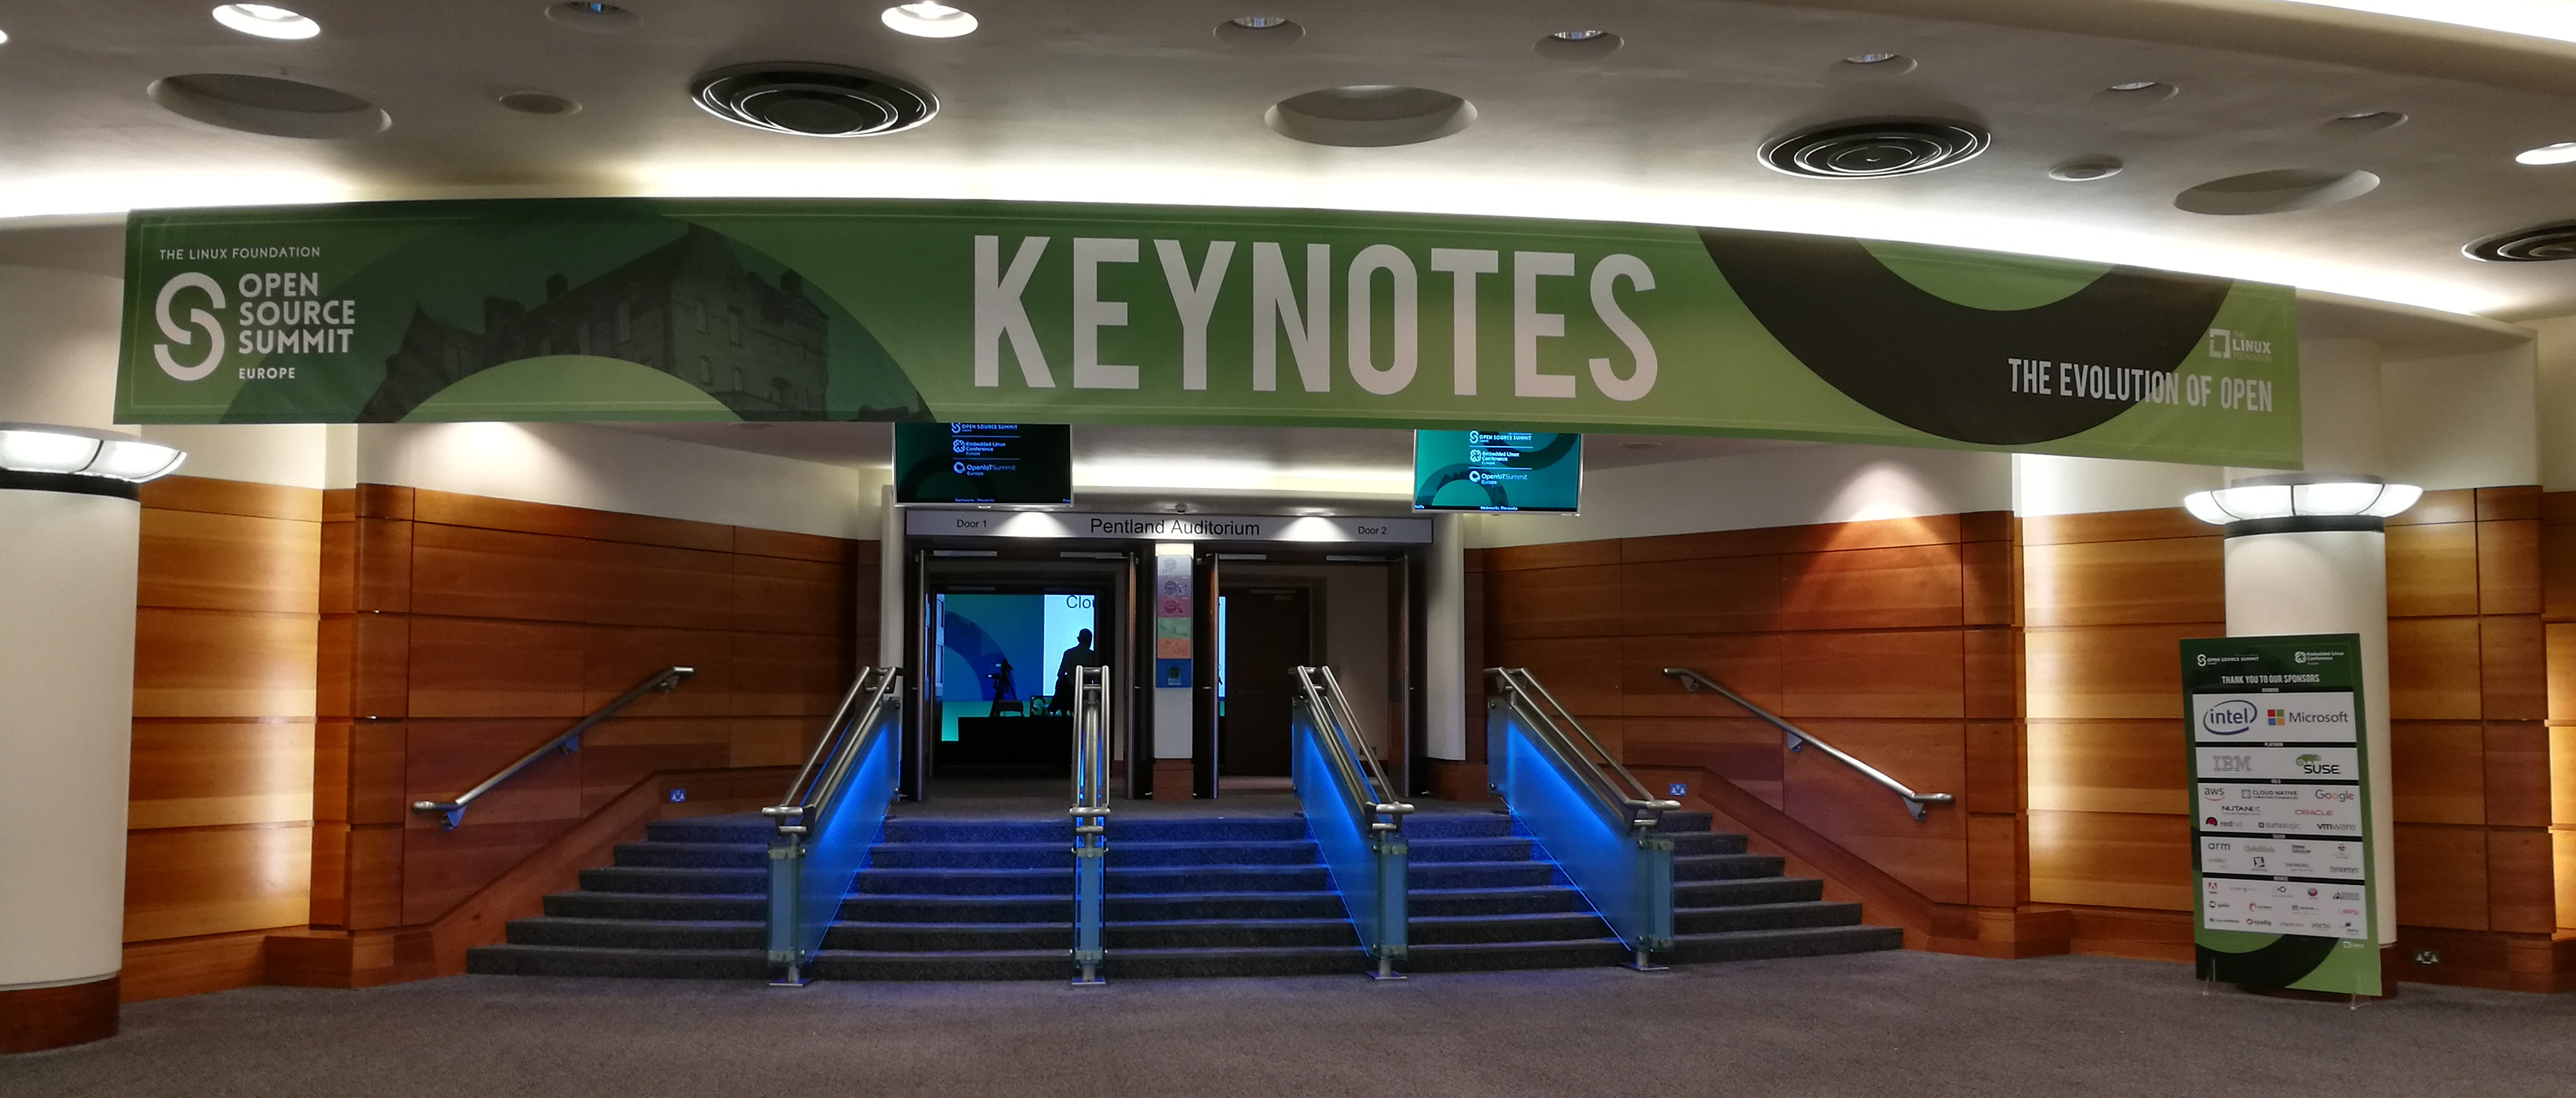 The entrance to the keynote room